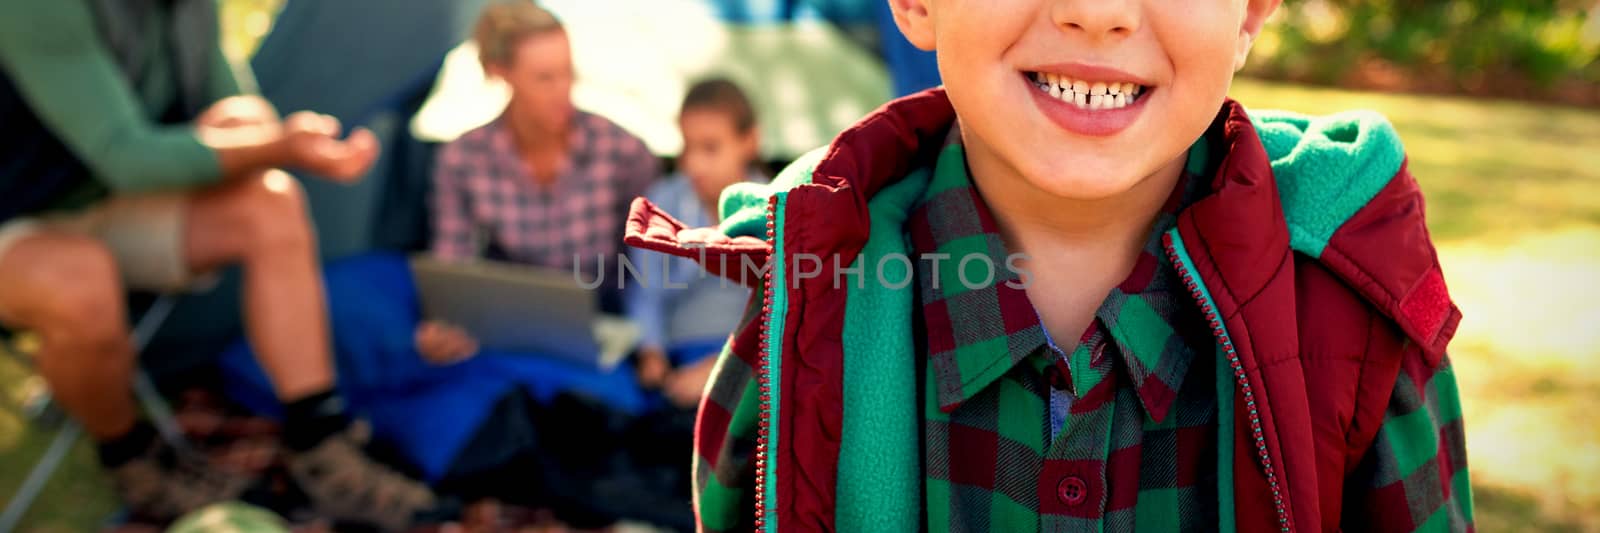 Boy smiling at camera while family sitting at tent in background on a sunny day